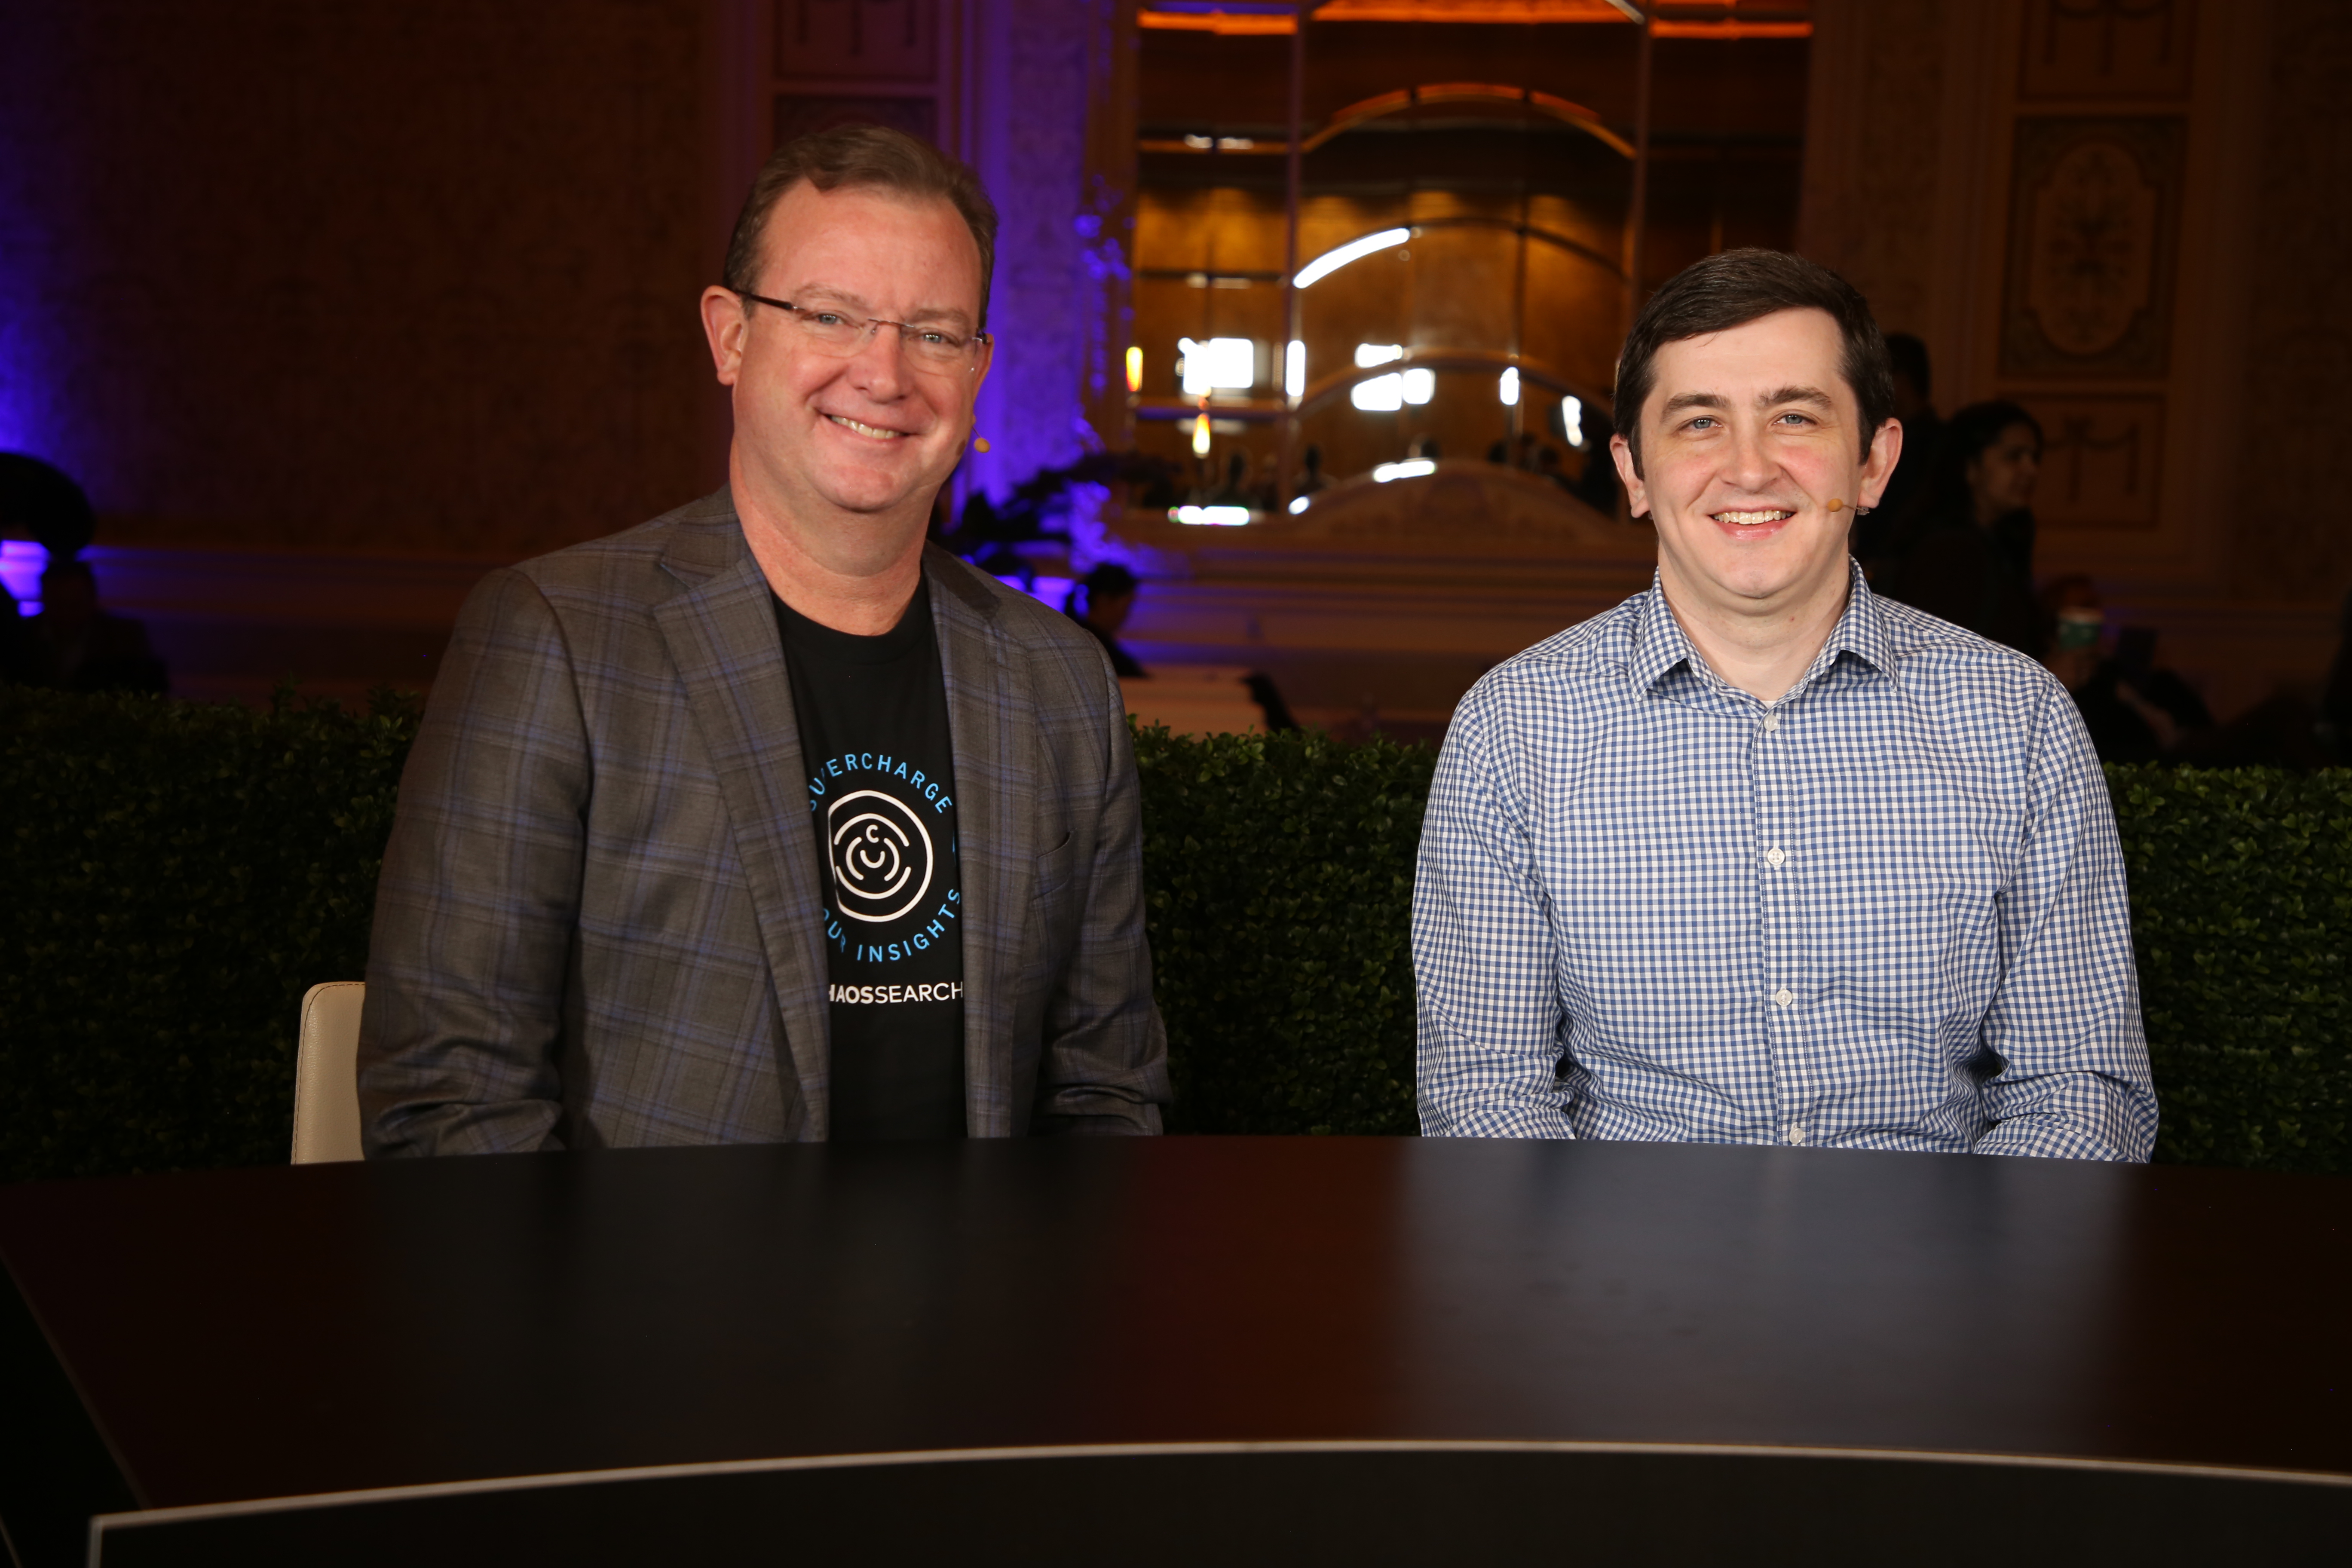 Kevin Miller and Ed Walsh at the AWS re:Invent 2022 Global Startup Program S2 E5 2022